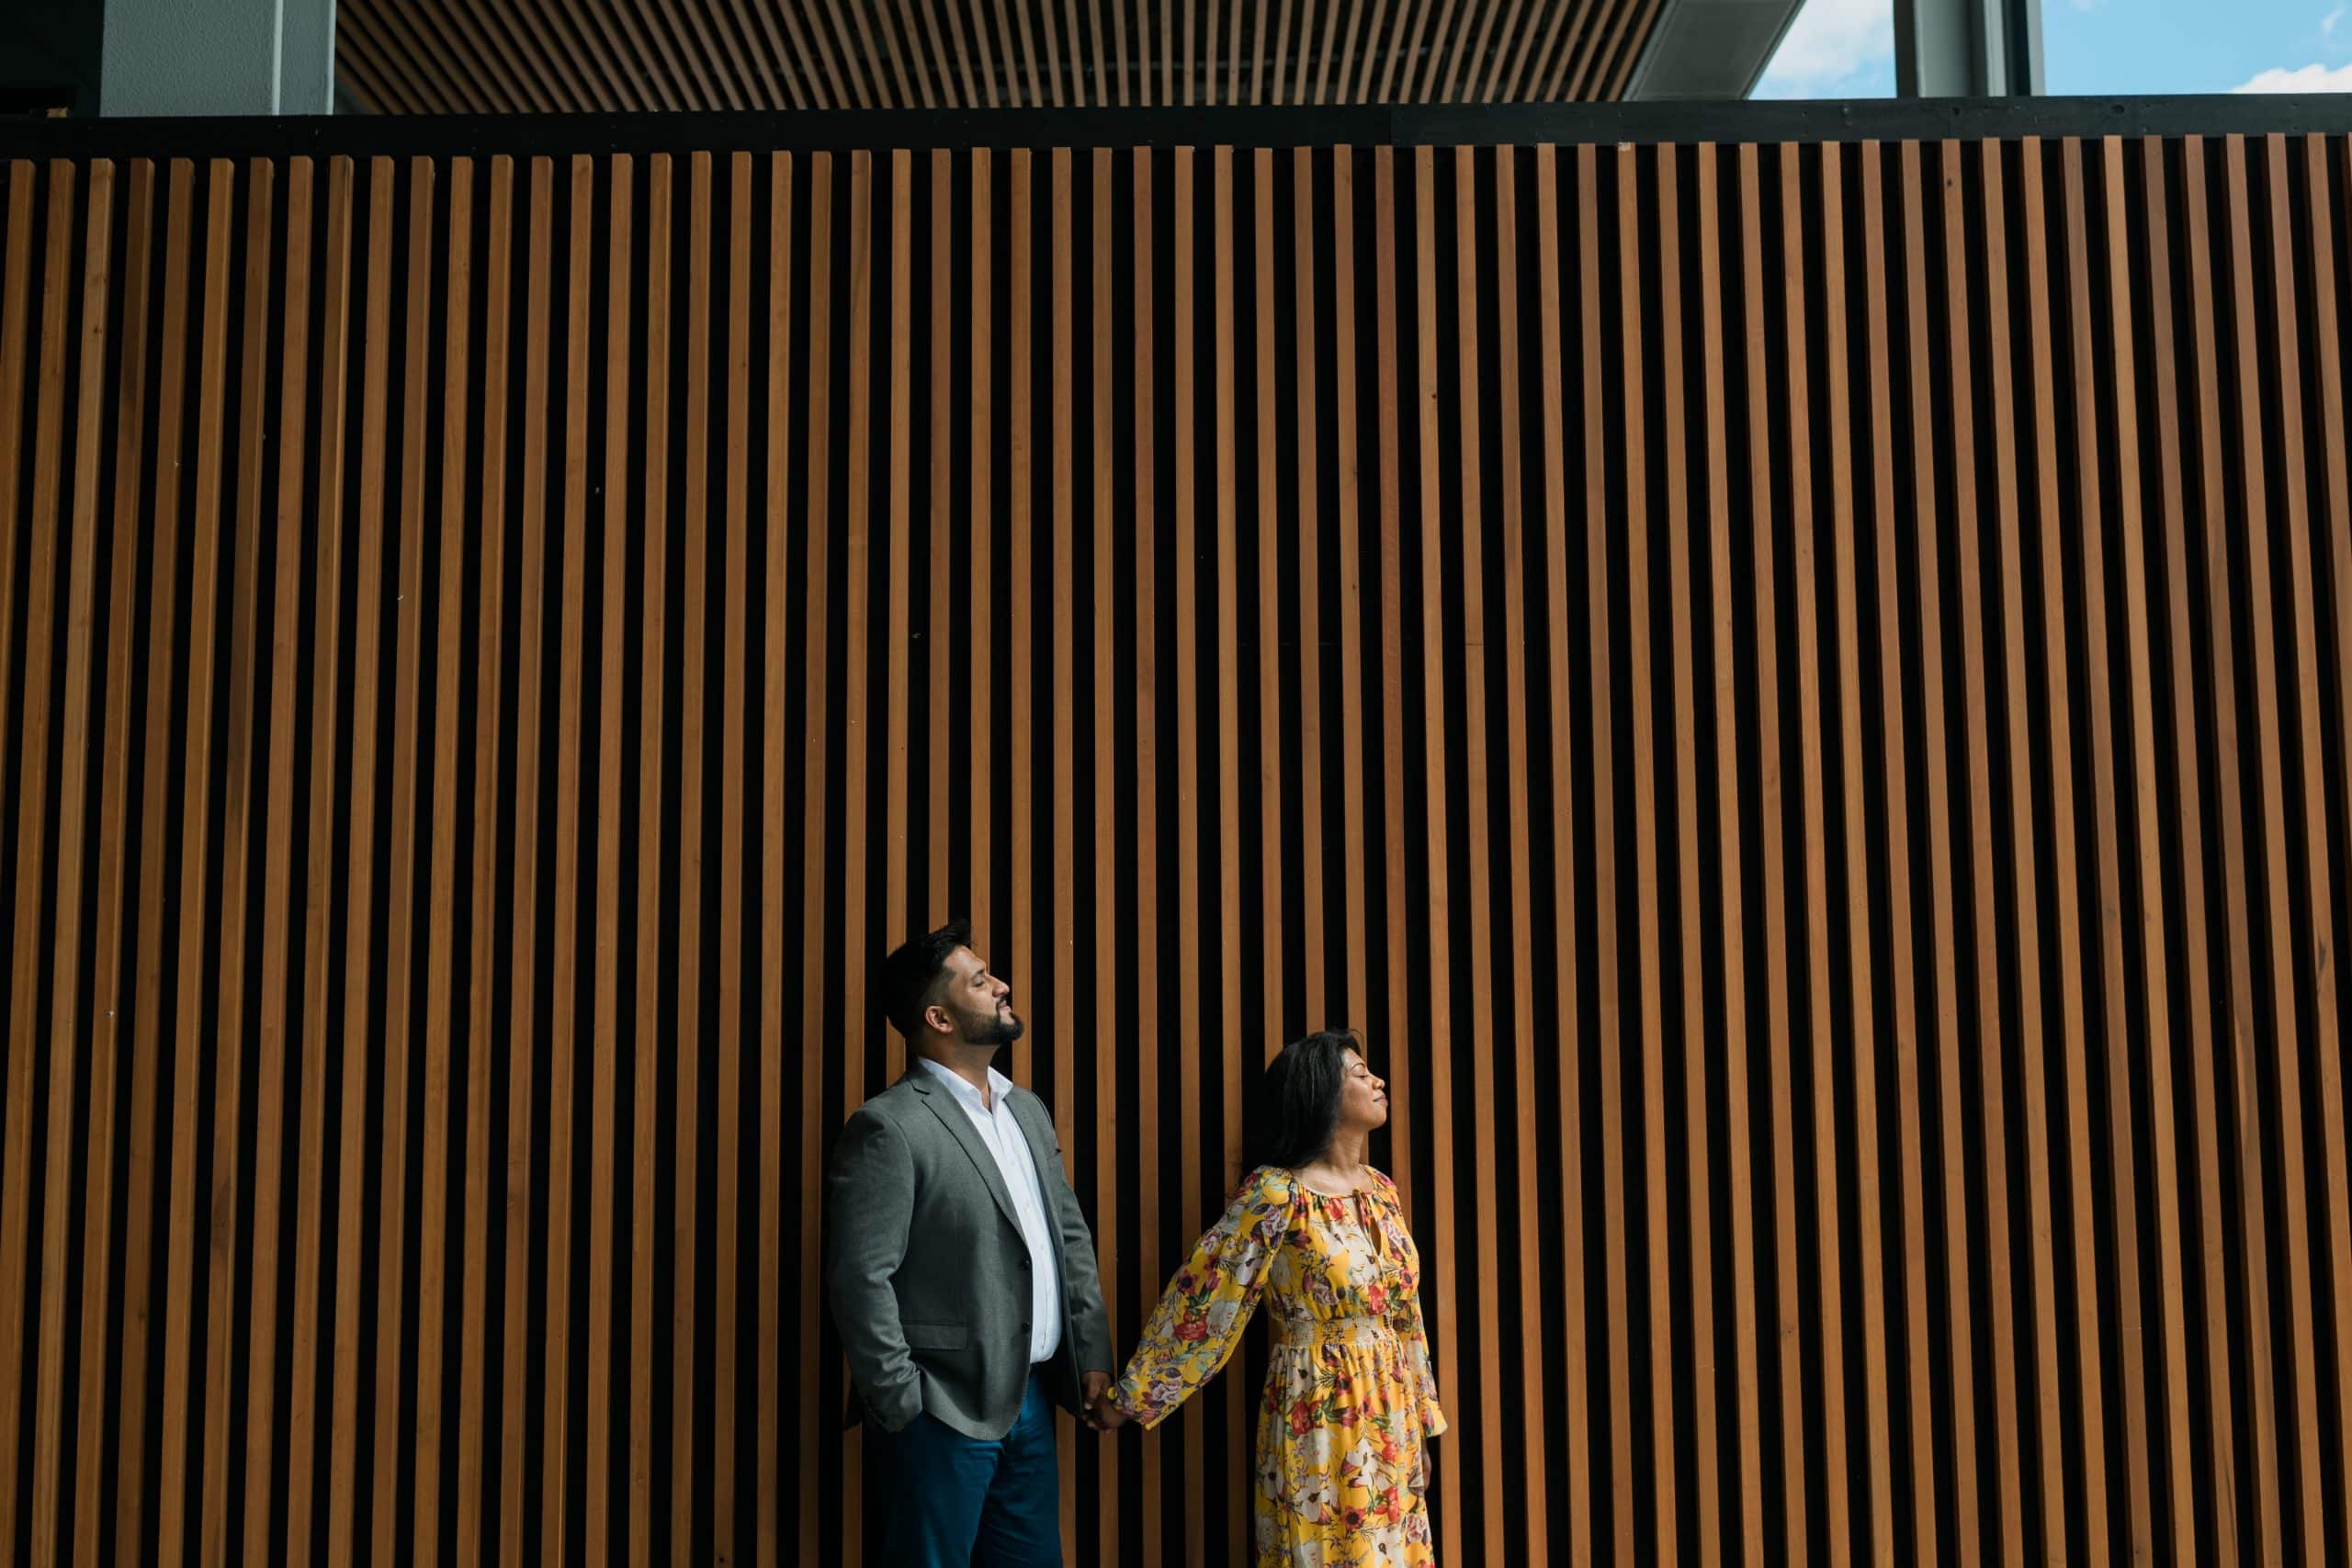 NYC engagement session in the Meatpacking District and South Street Seaport, captured by NYC wedding photographer Ben Lau.